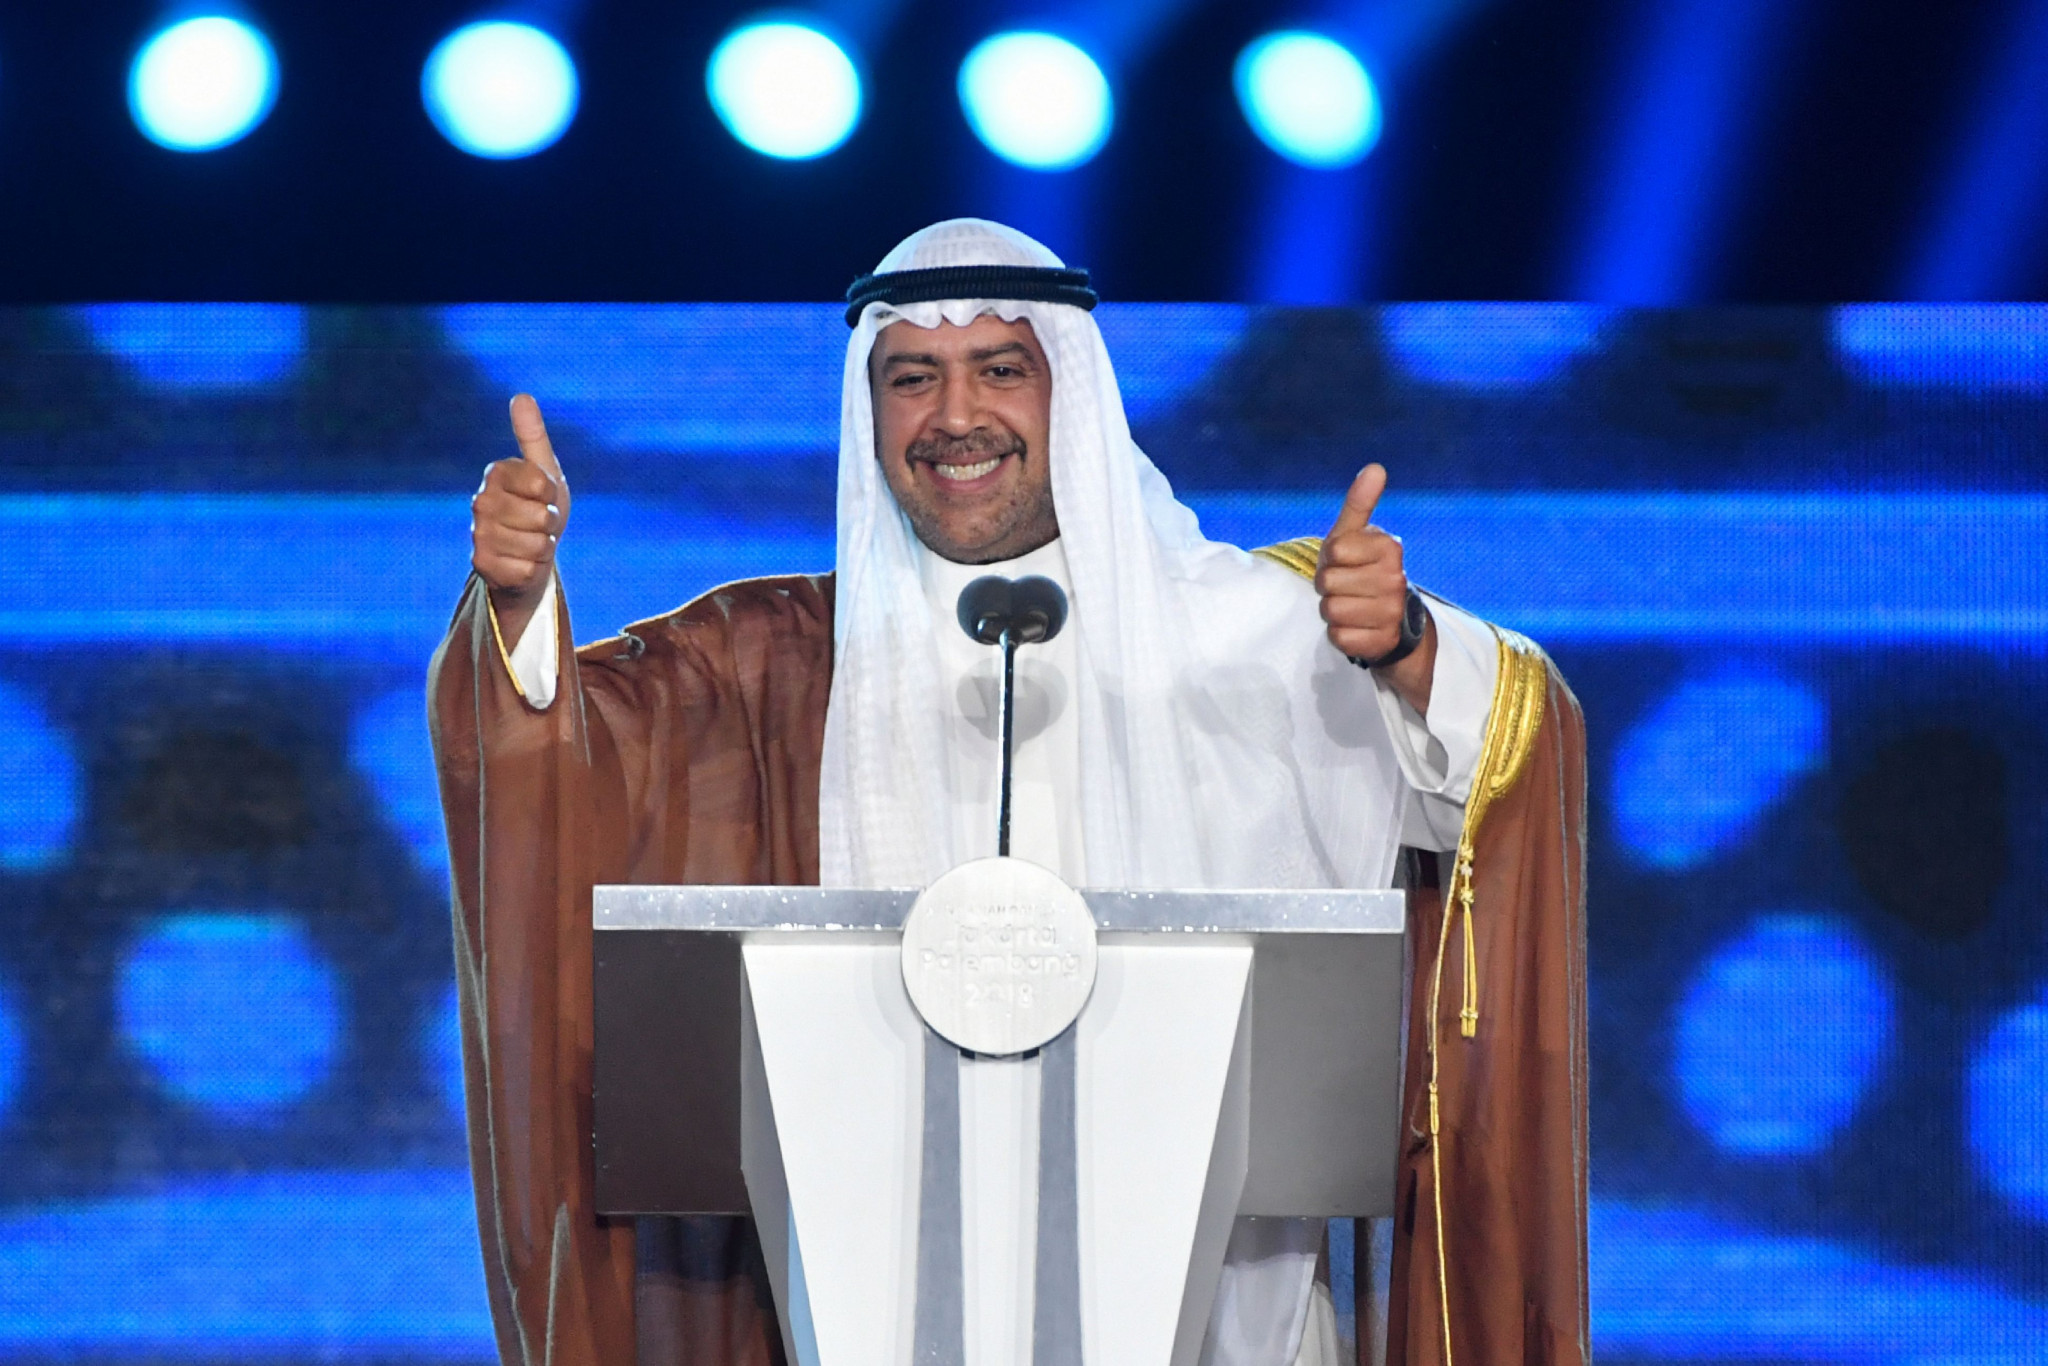 Olympic Council of Asia President Ahmad Al-Fahad Al-Sabah declared the Games officially over ©Getty Images